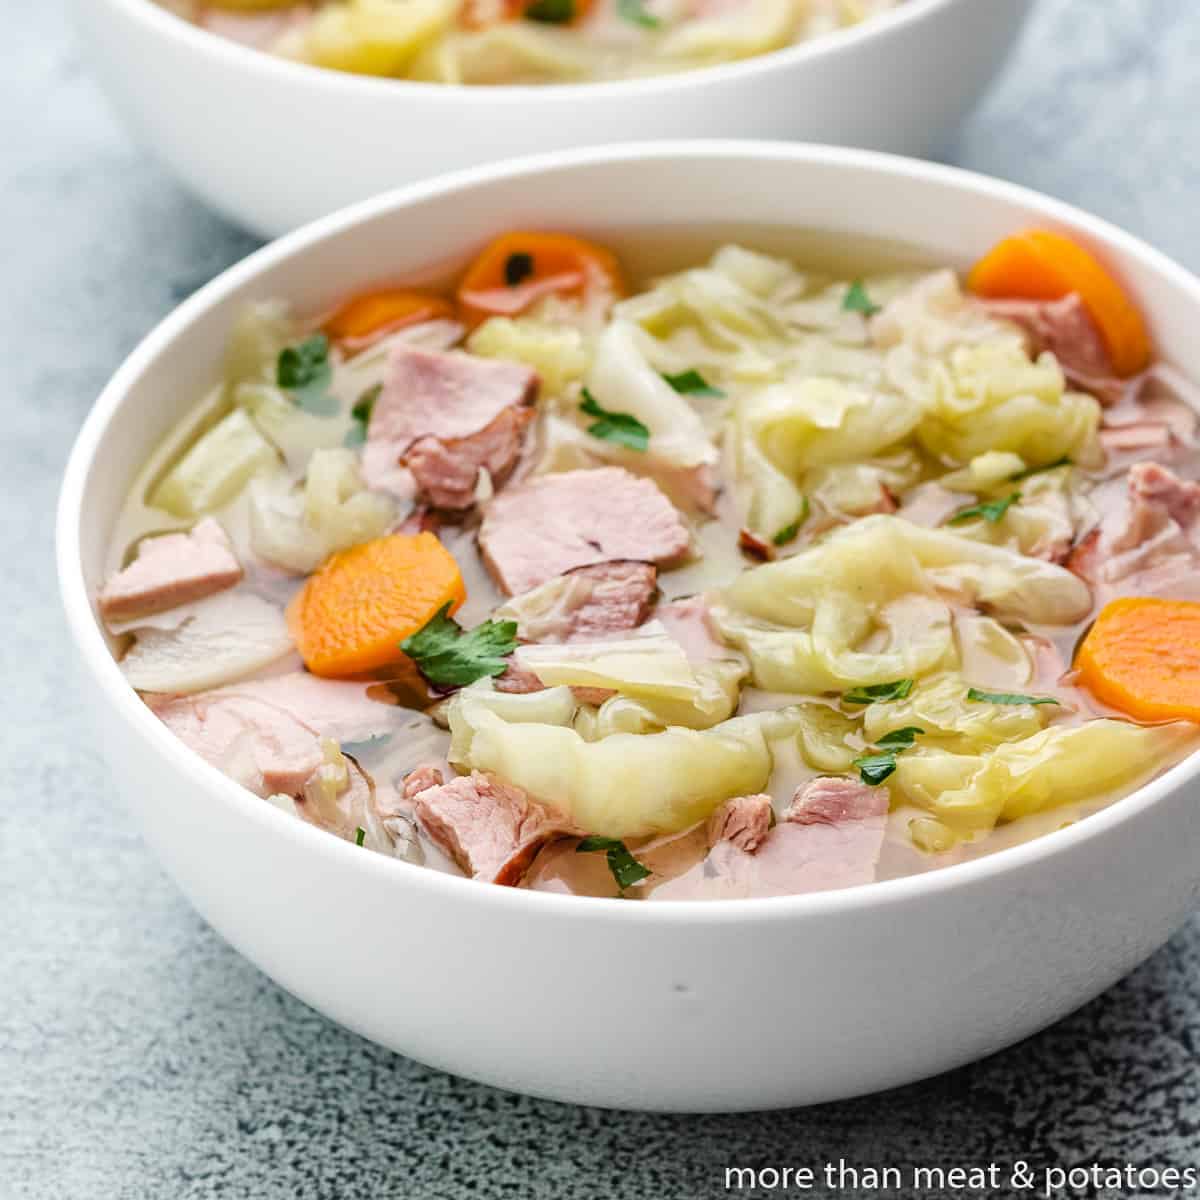 The ham and cabbage soup served in a bowl.